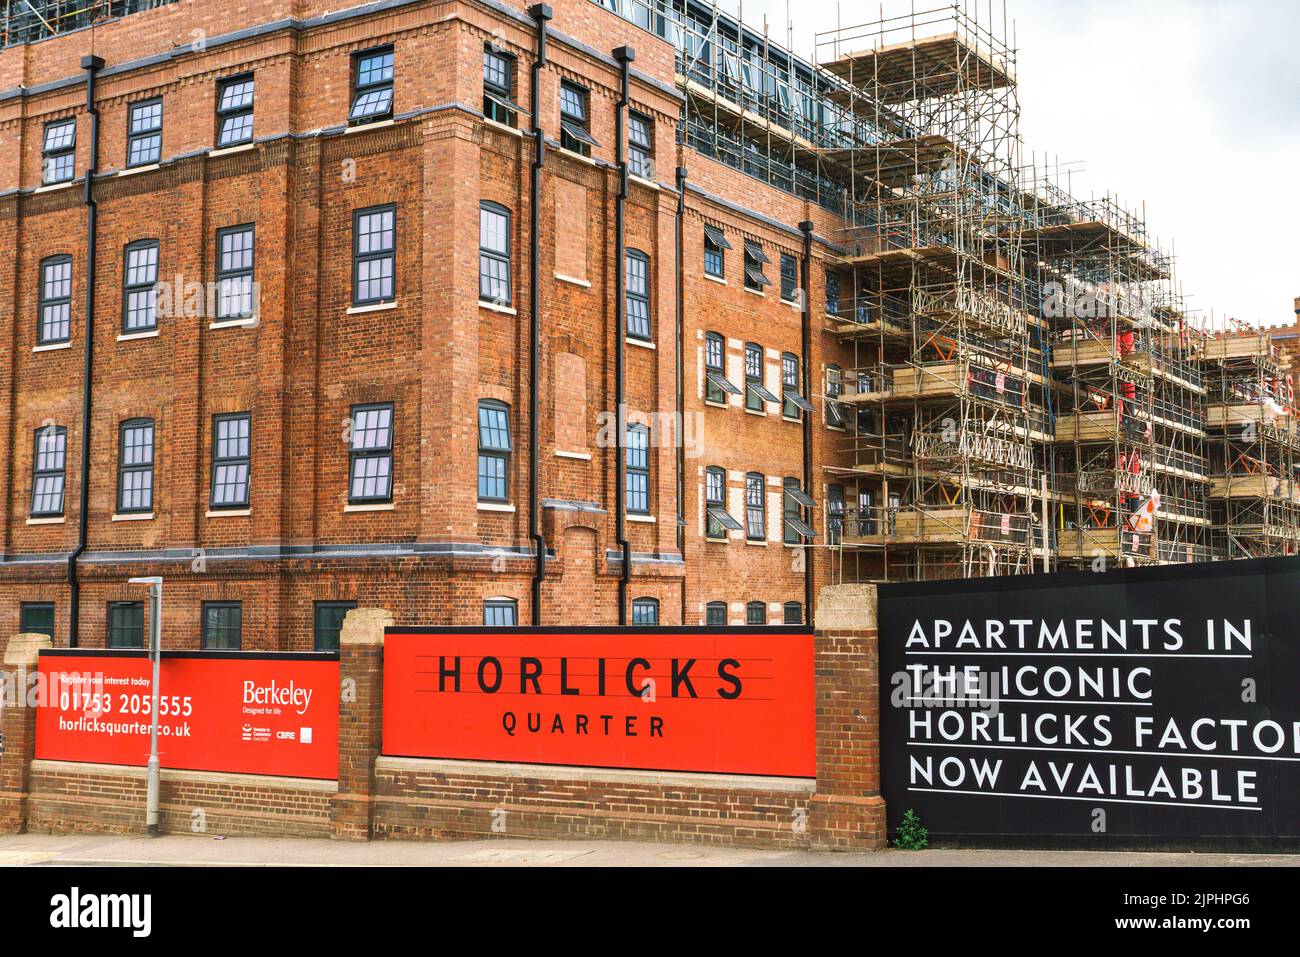 New development in Slough, Berkshire on the site of the Horlicks Factory. Renamed the Horlicks Quarter and aiming to create new communities in Slough. Stock Photo